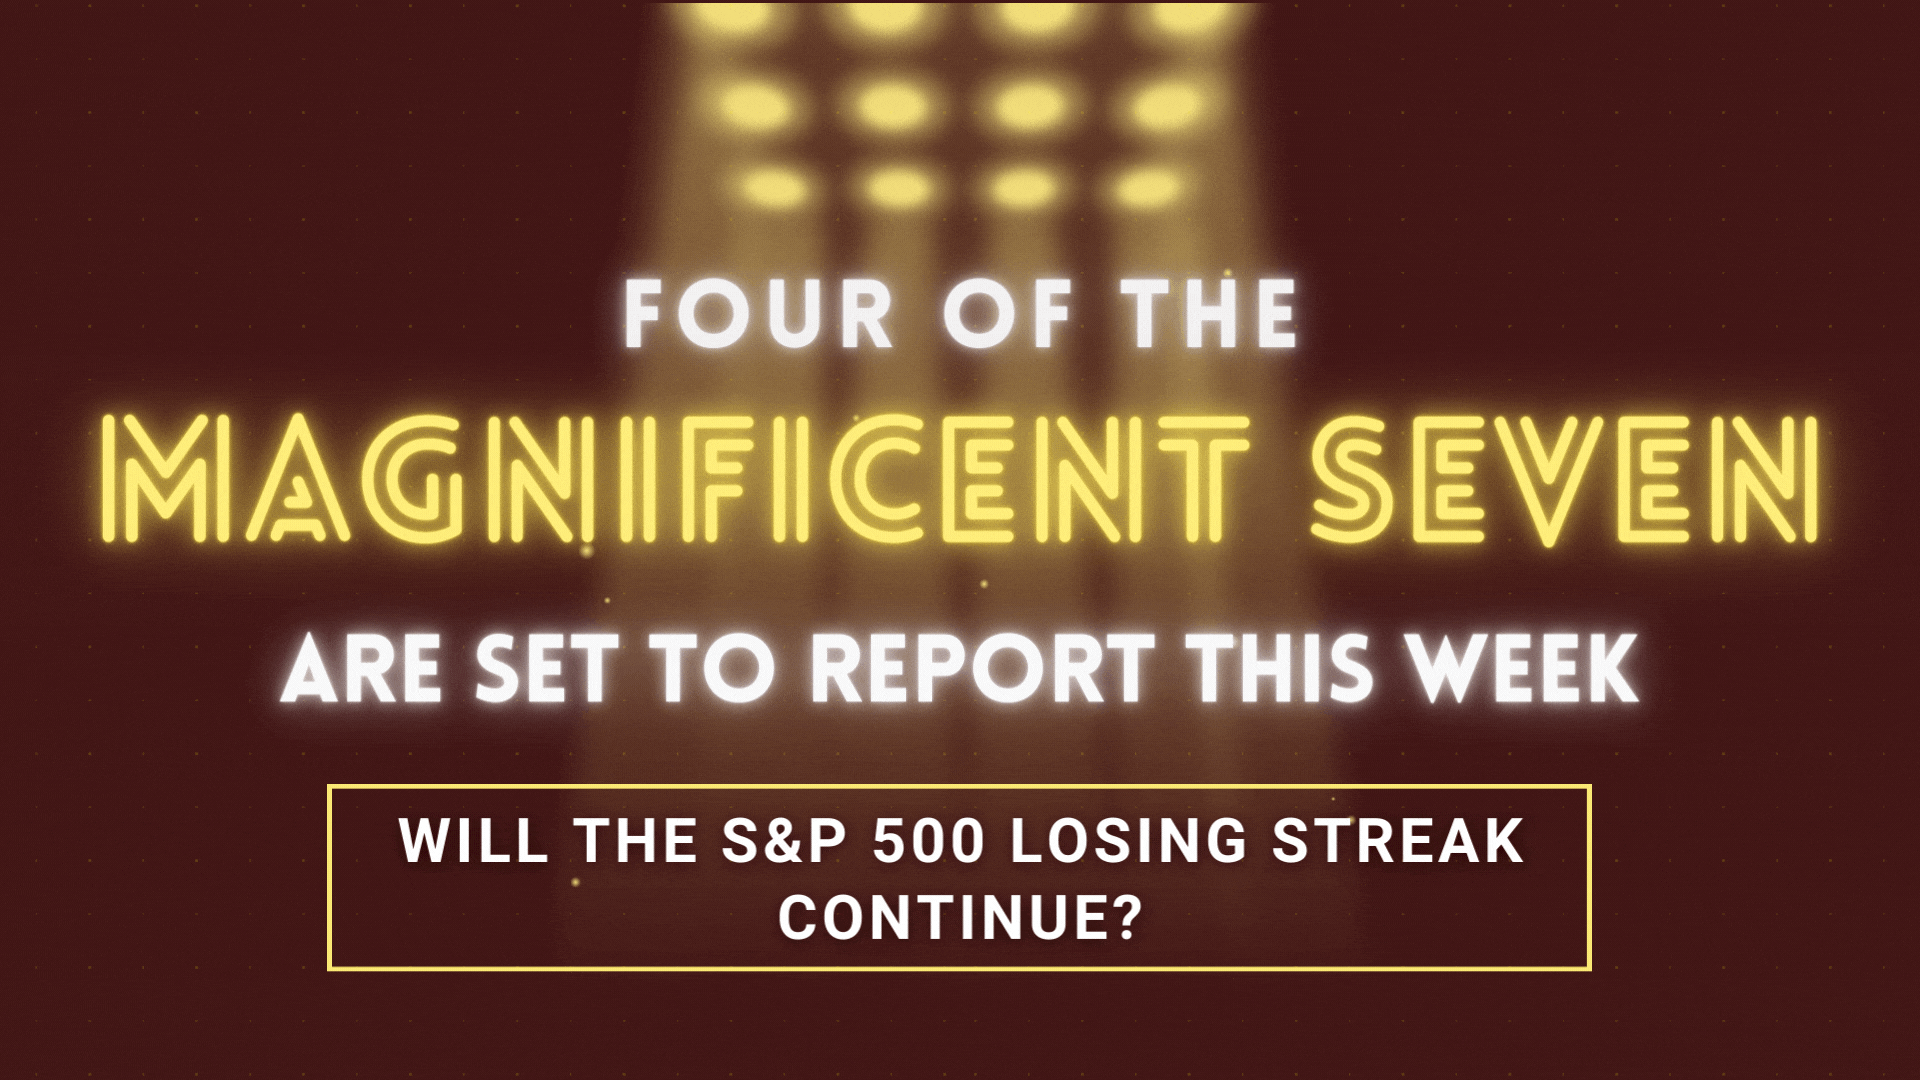 The Magnificent 7 Get Set to Report Amidst an S&P 500 Losing Streak